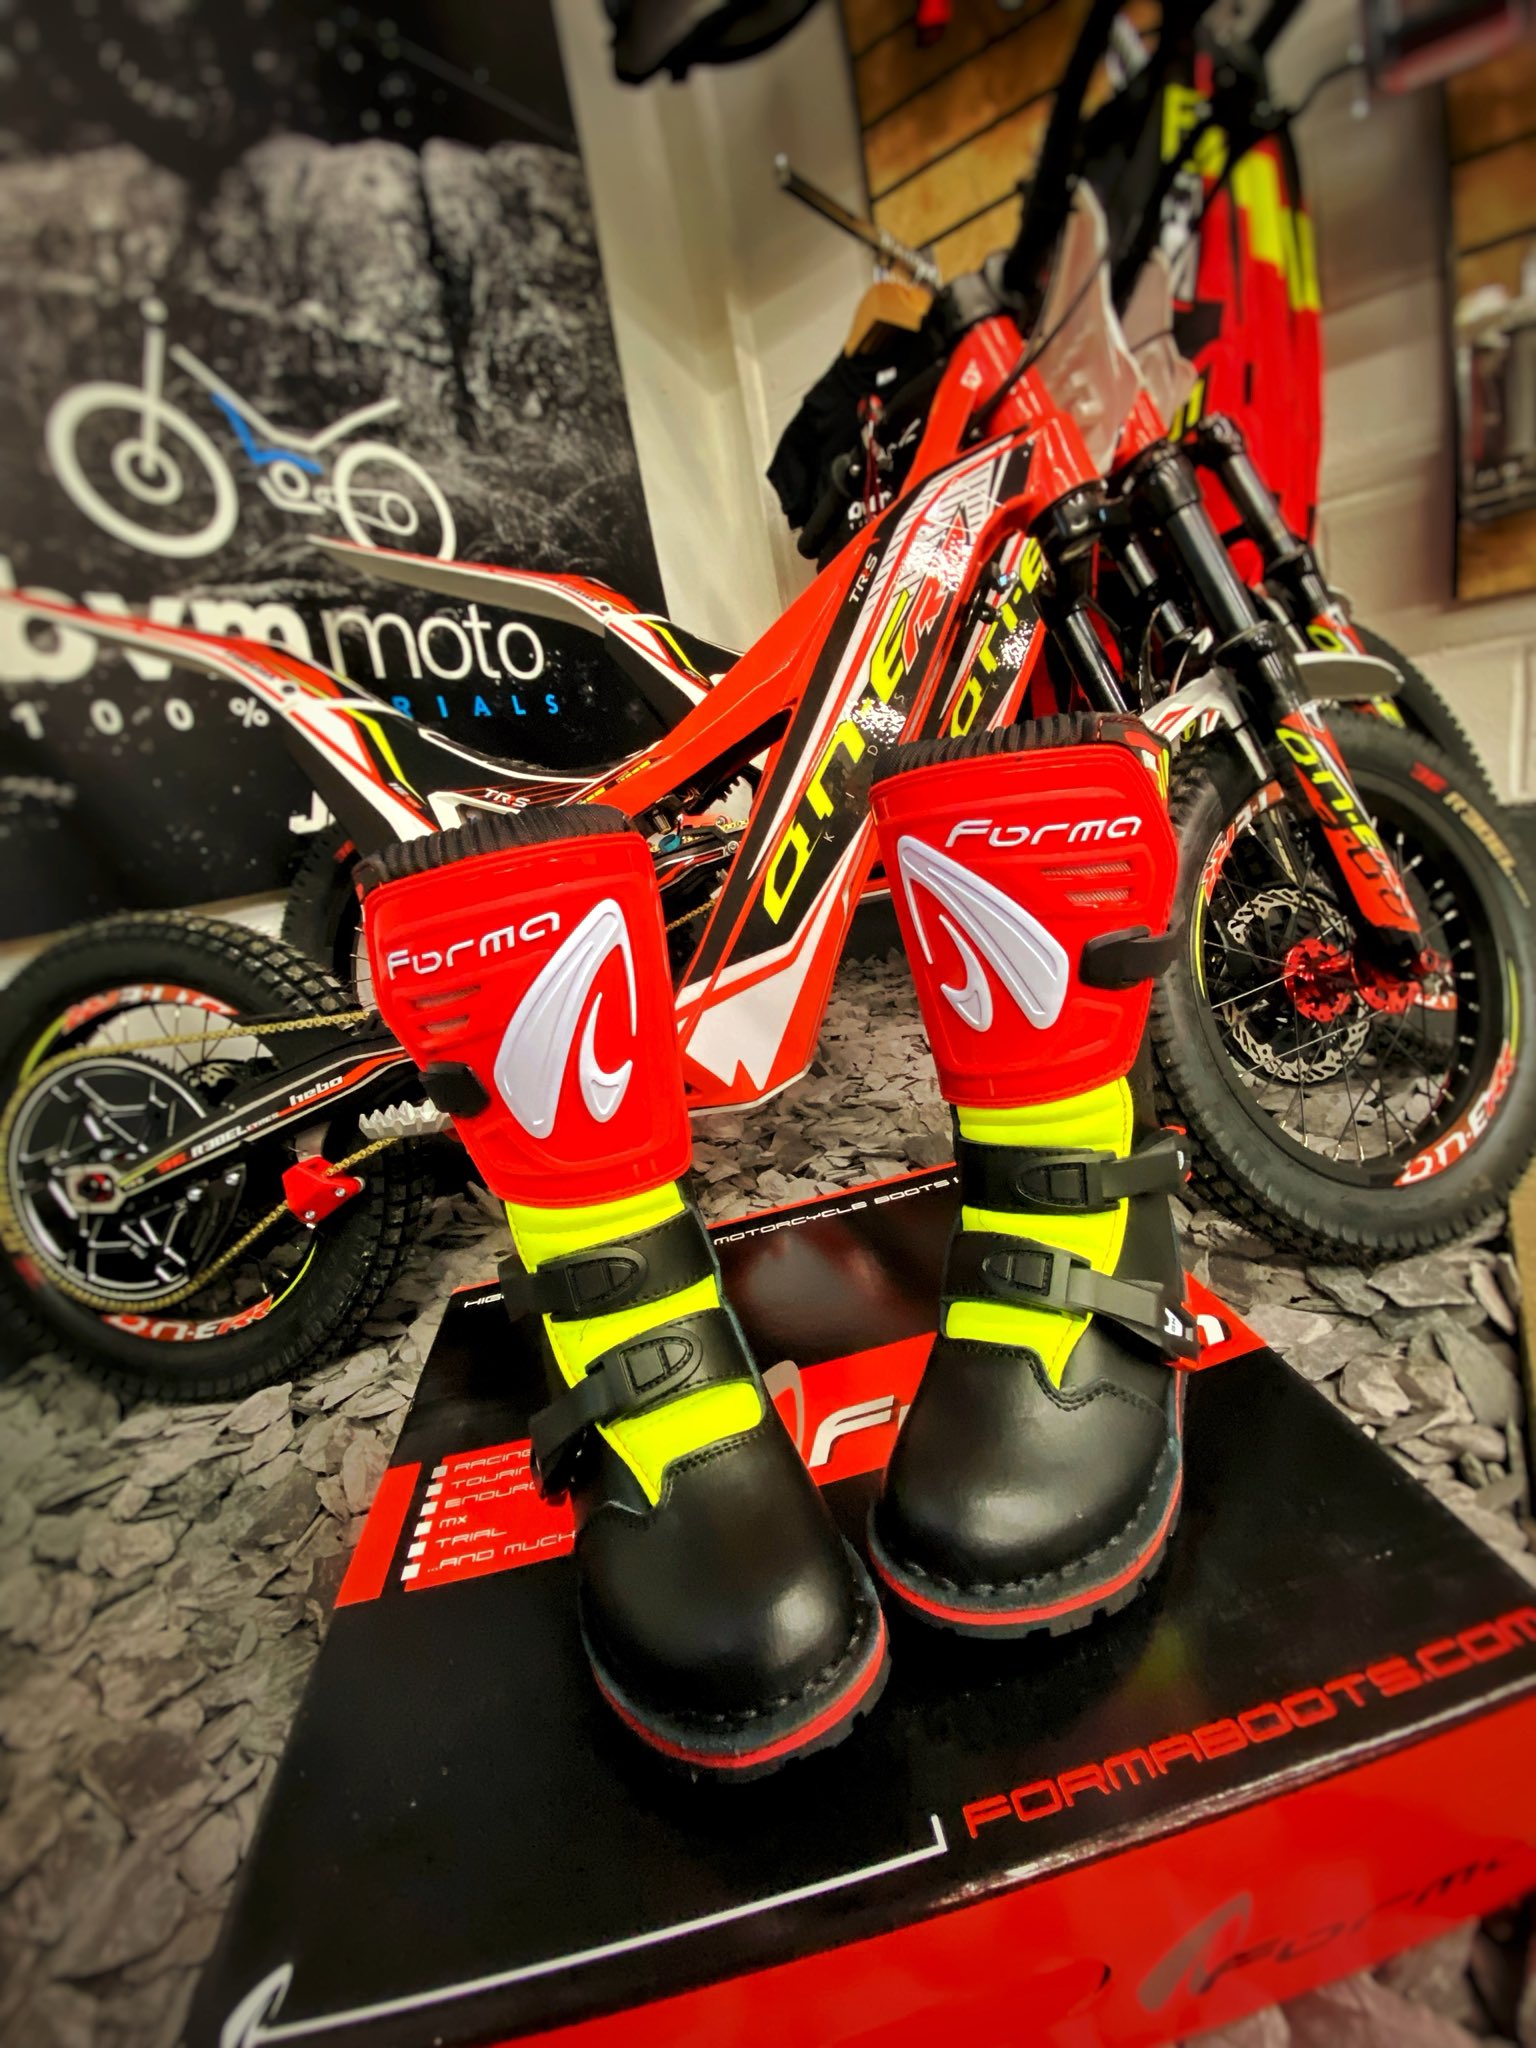 bvm-moto on X: Tiny boots for tiny riders! 😍 Forma Rock trials